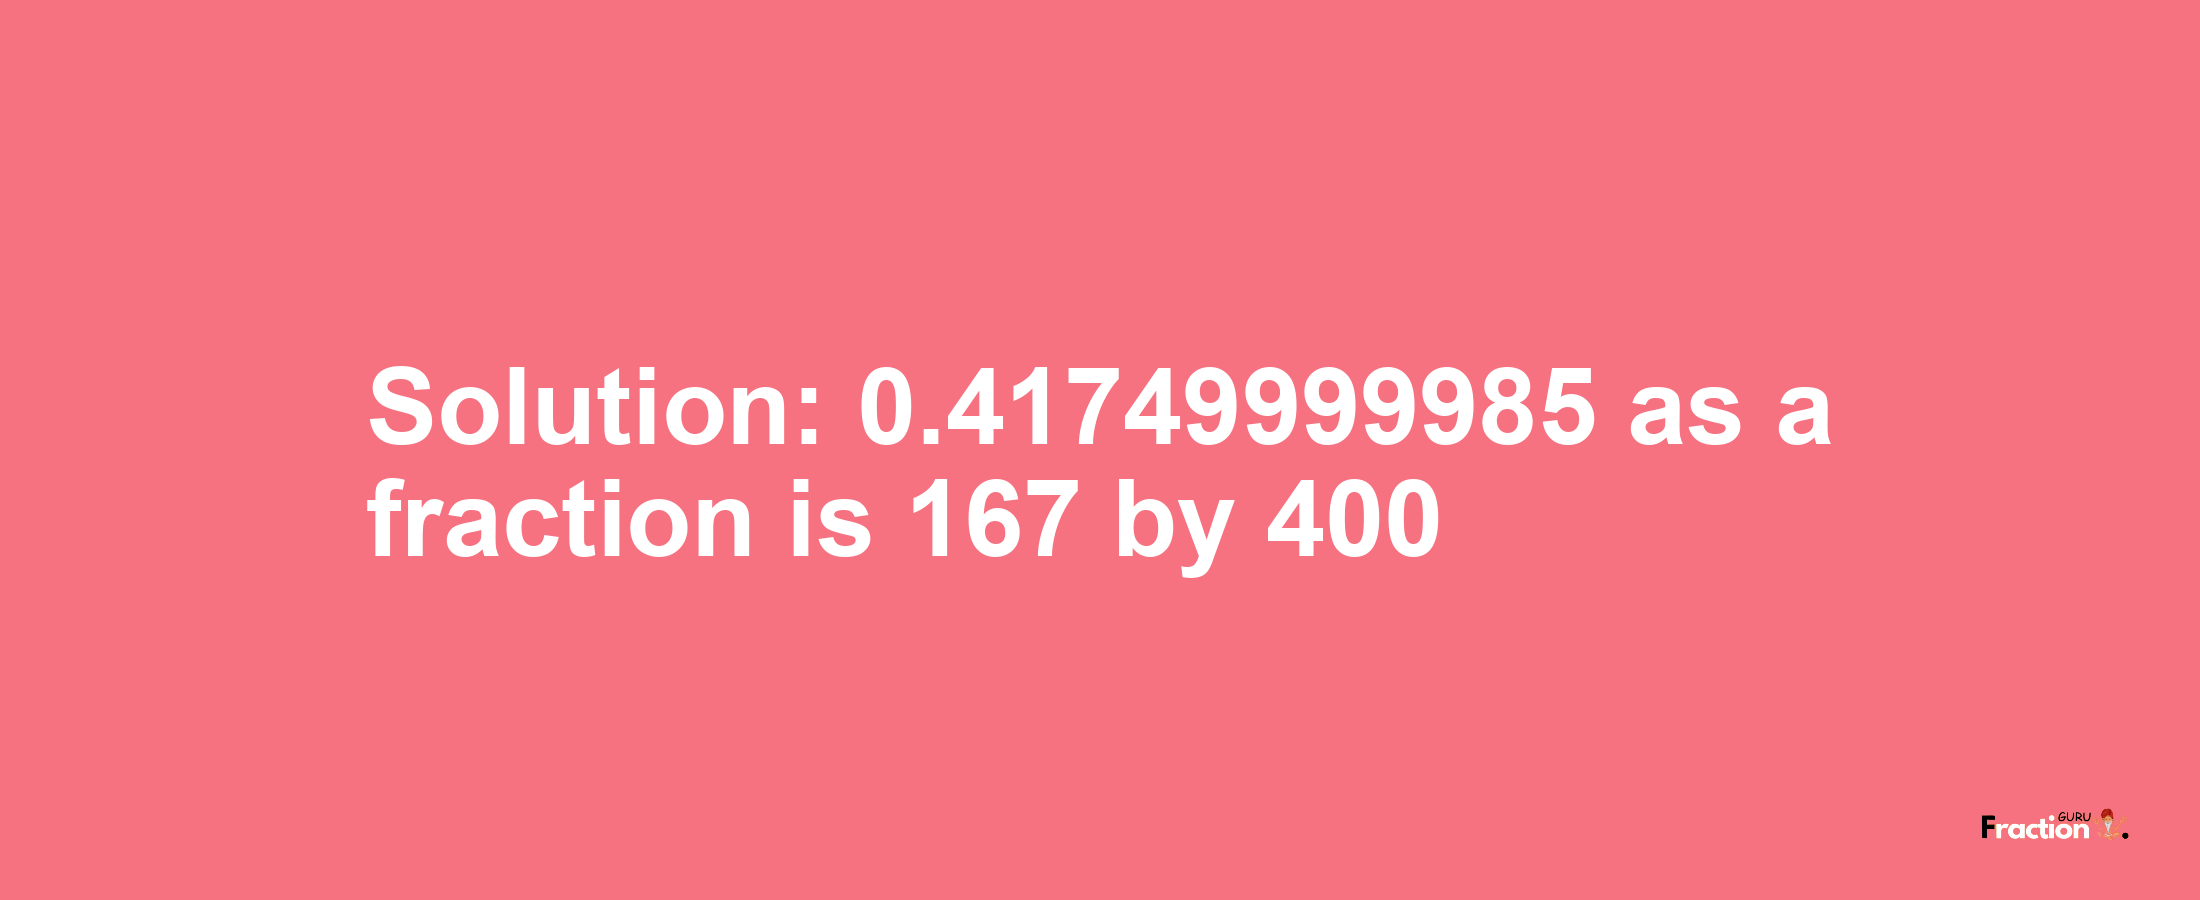 Solution:0.41749999985 as a fraction is 167/400